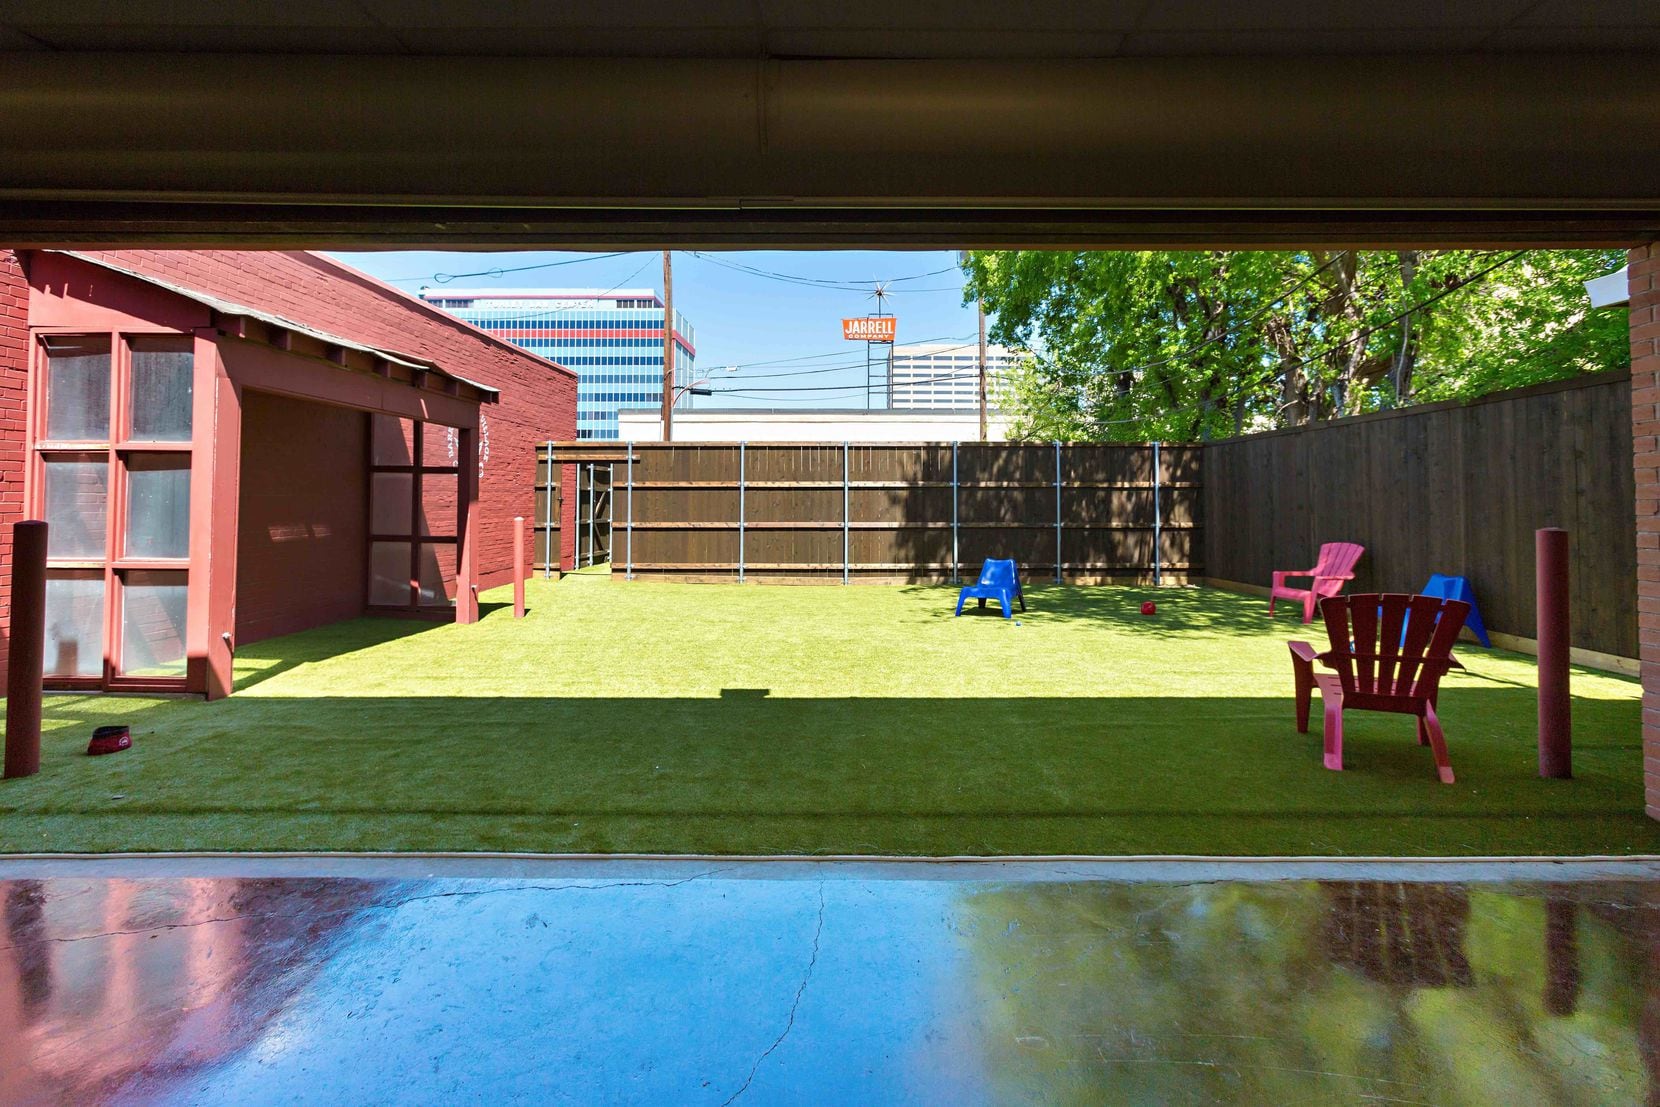 You can check out the playroom yard at Barking Hound Village during a yappy hour Thursday.